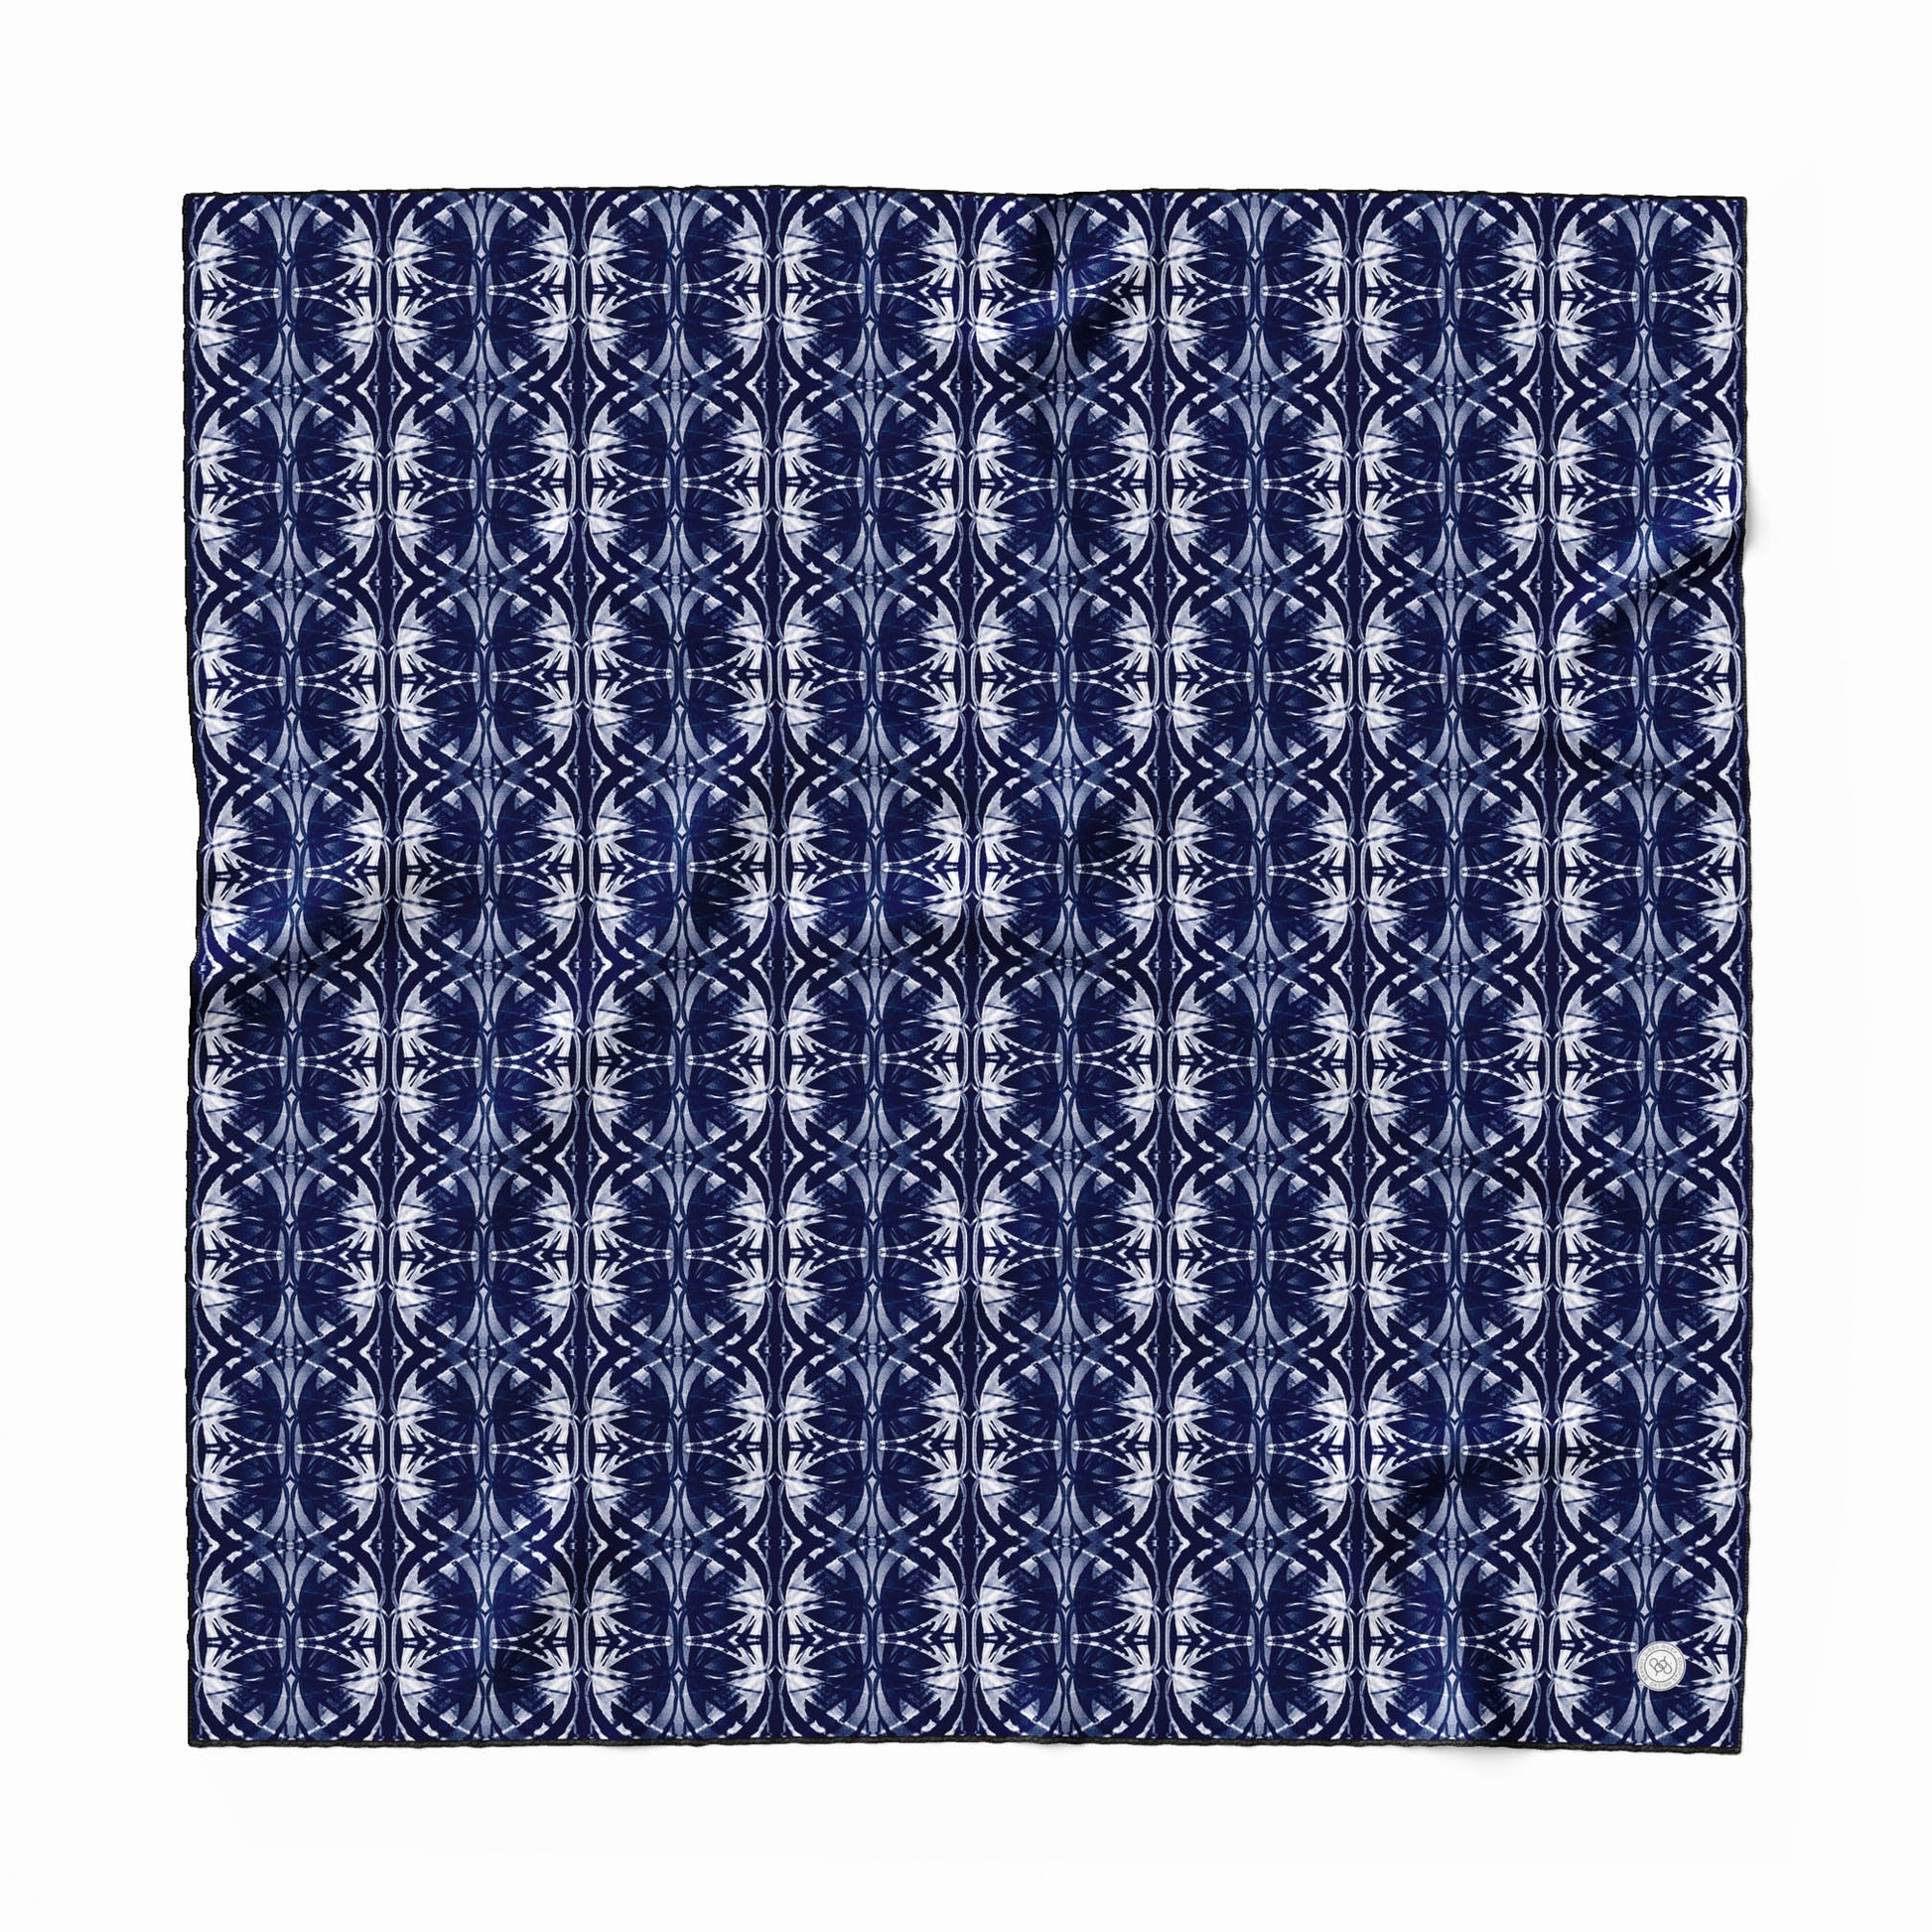 Silk scarf featuring a navy blue and white hand-painted pattern.